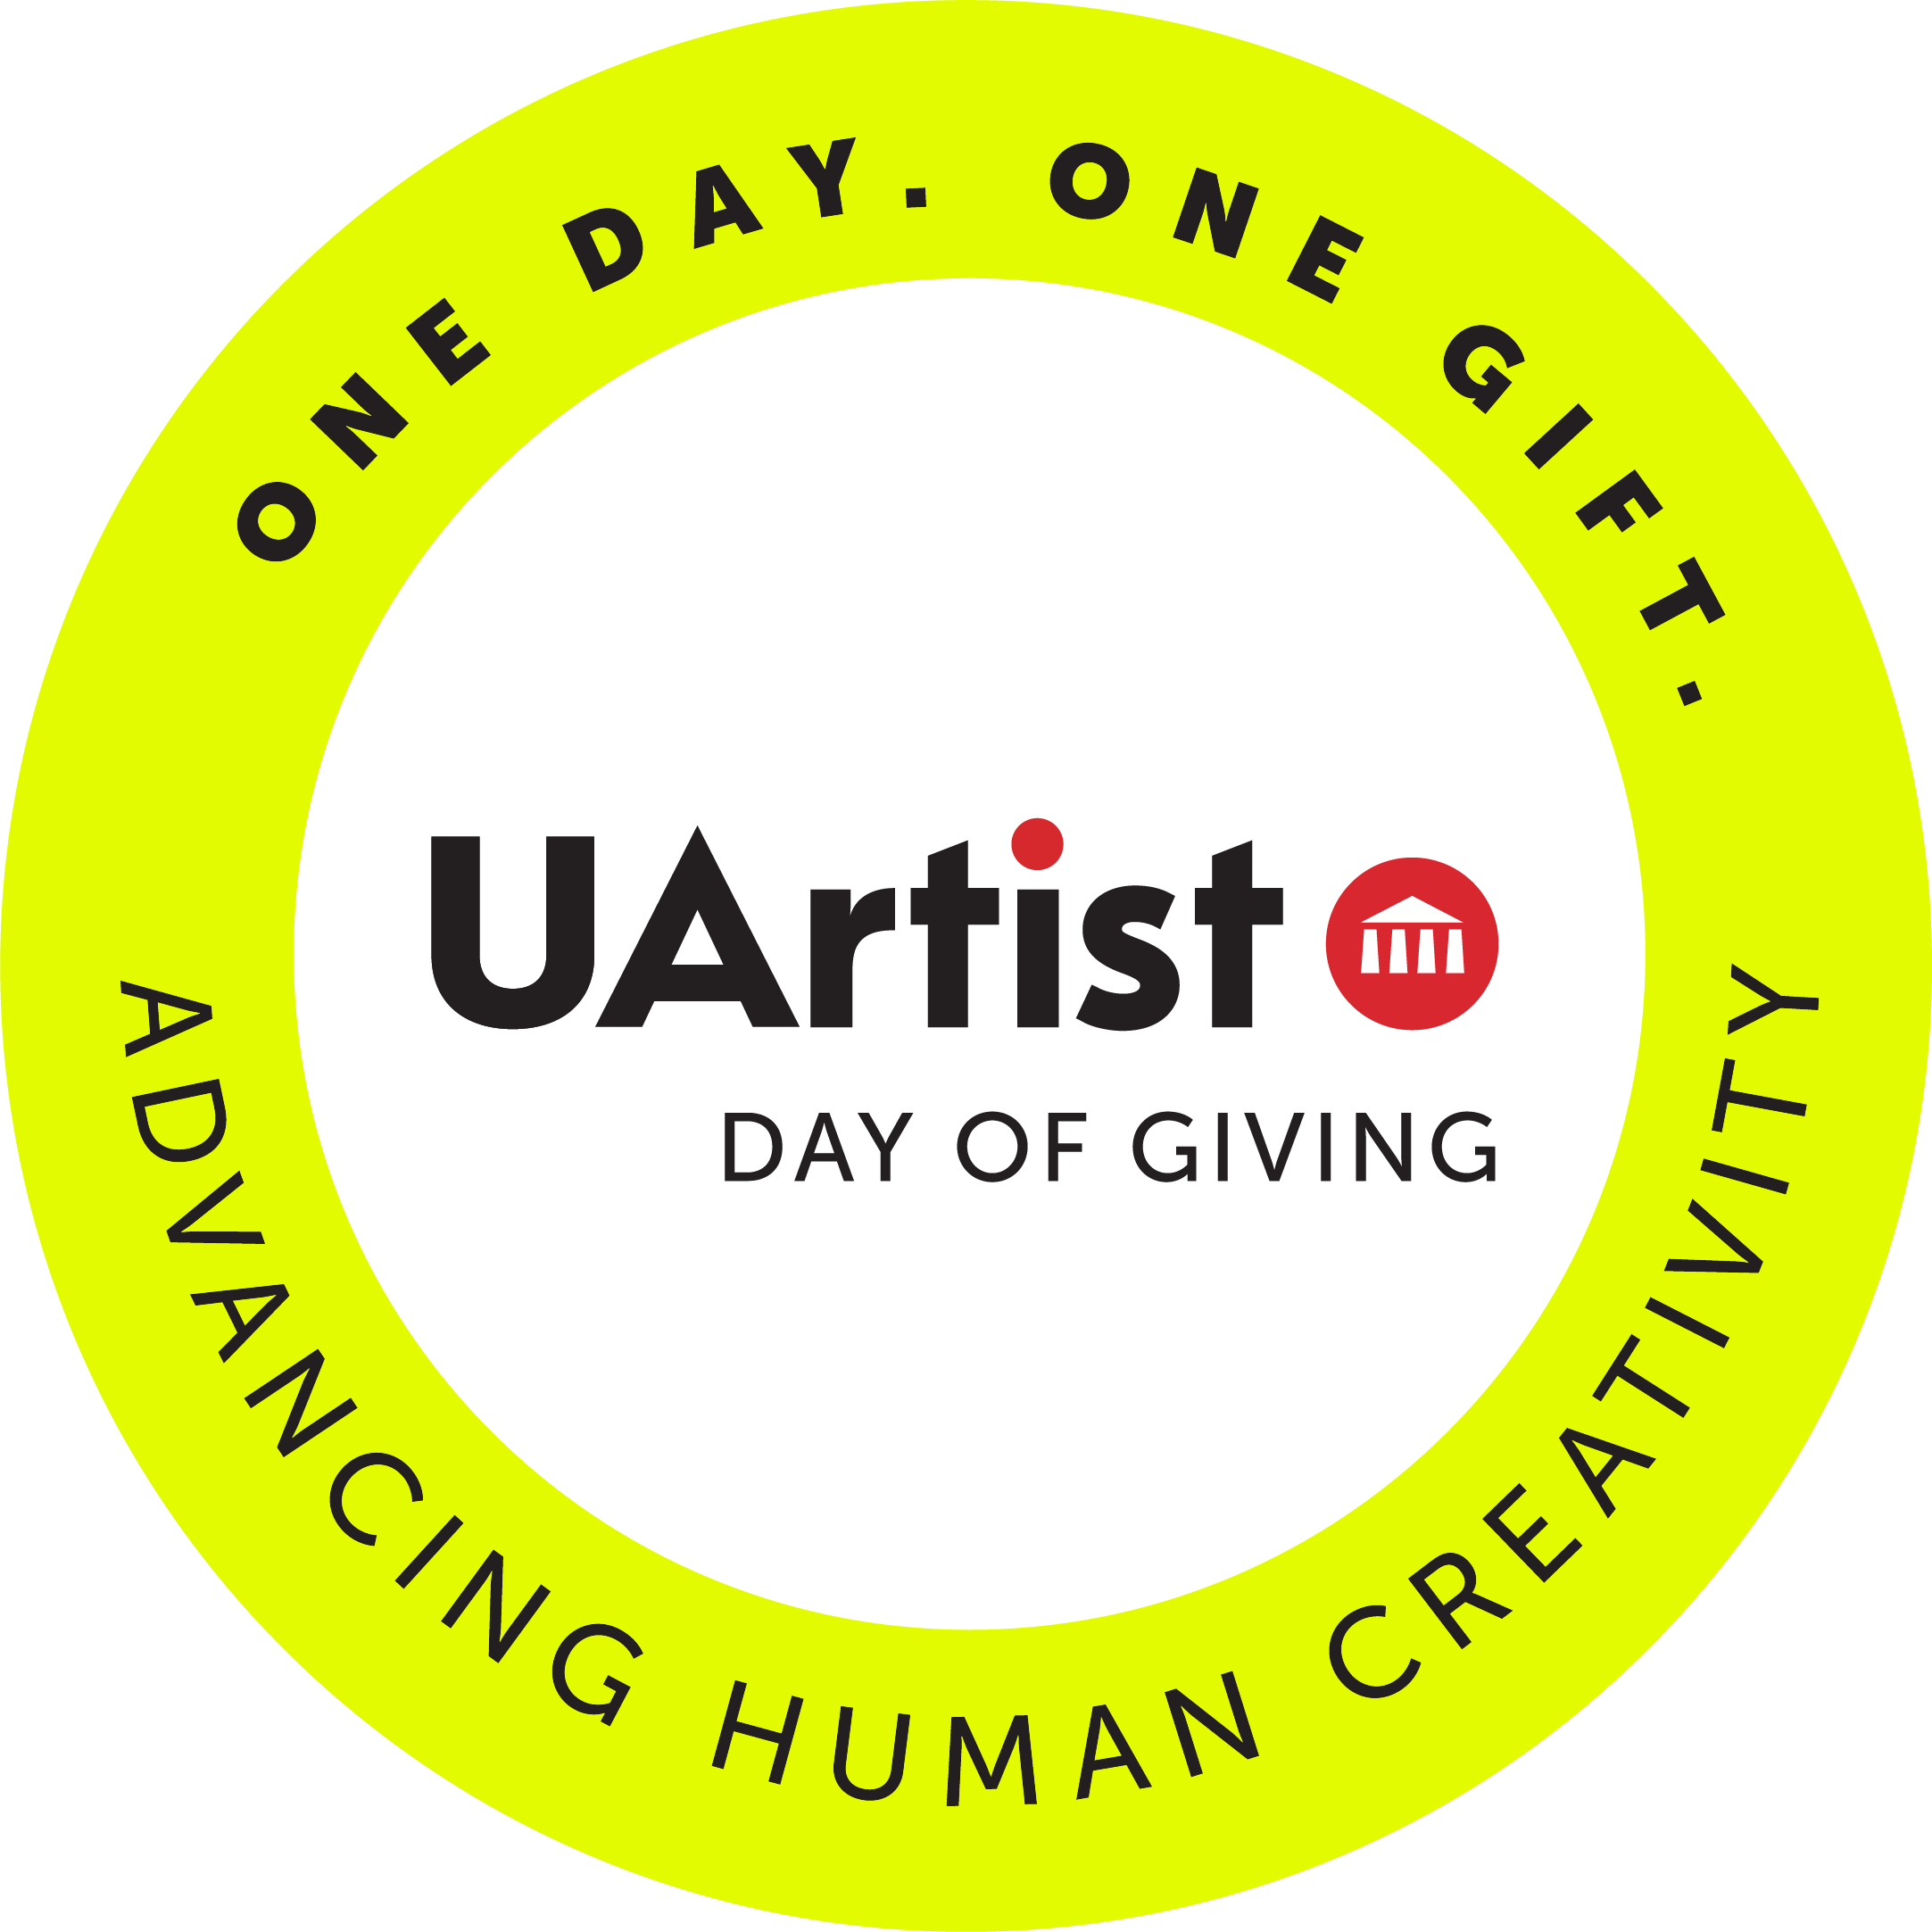 A bright chartreuse circle with the text "One Day. One Gift." at the top and "Advancing Human Creativity" at the bottom of the circle. In the center is the UArtist Day of Giving logo.